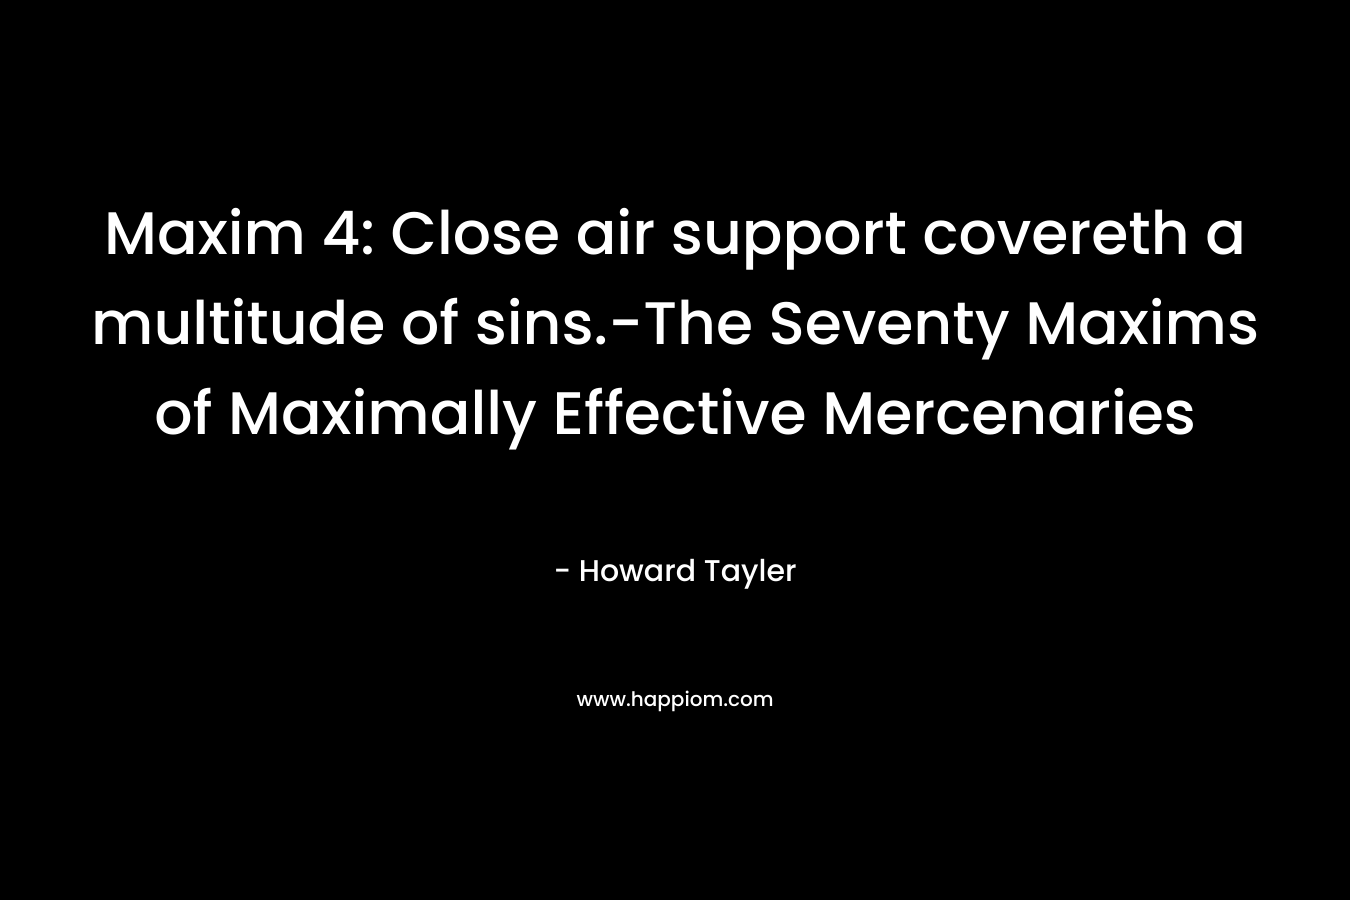 Maxim 4: Close air support covereth a multitude of sins.-The Seventy Maxims of Maximally Effective Mercenaries